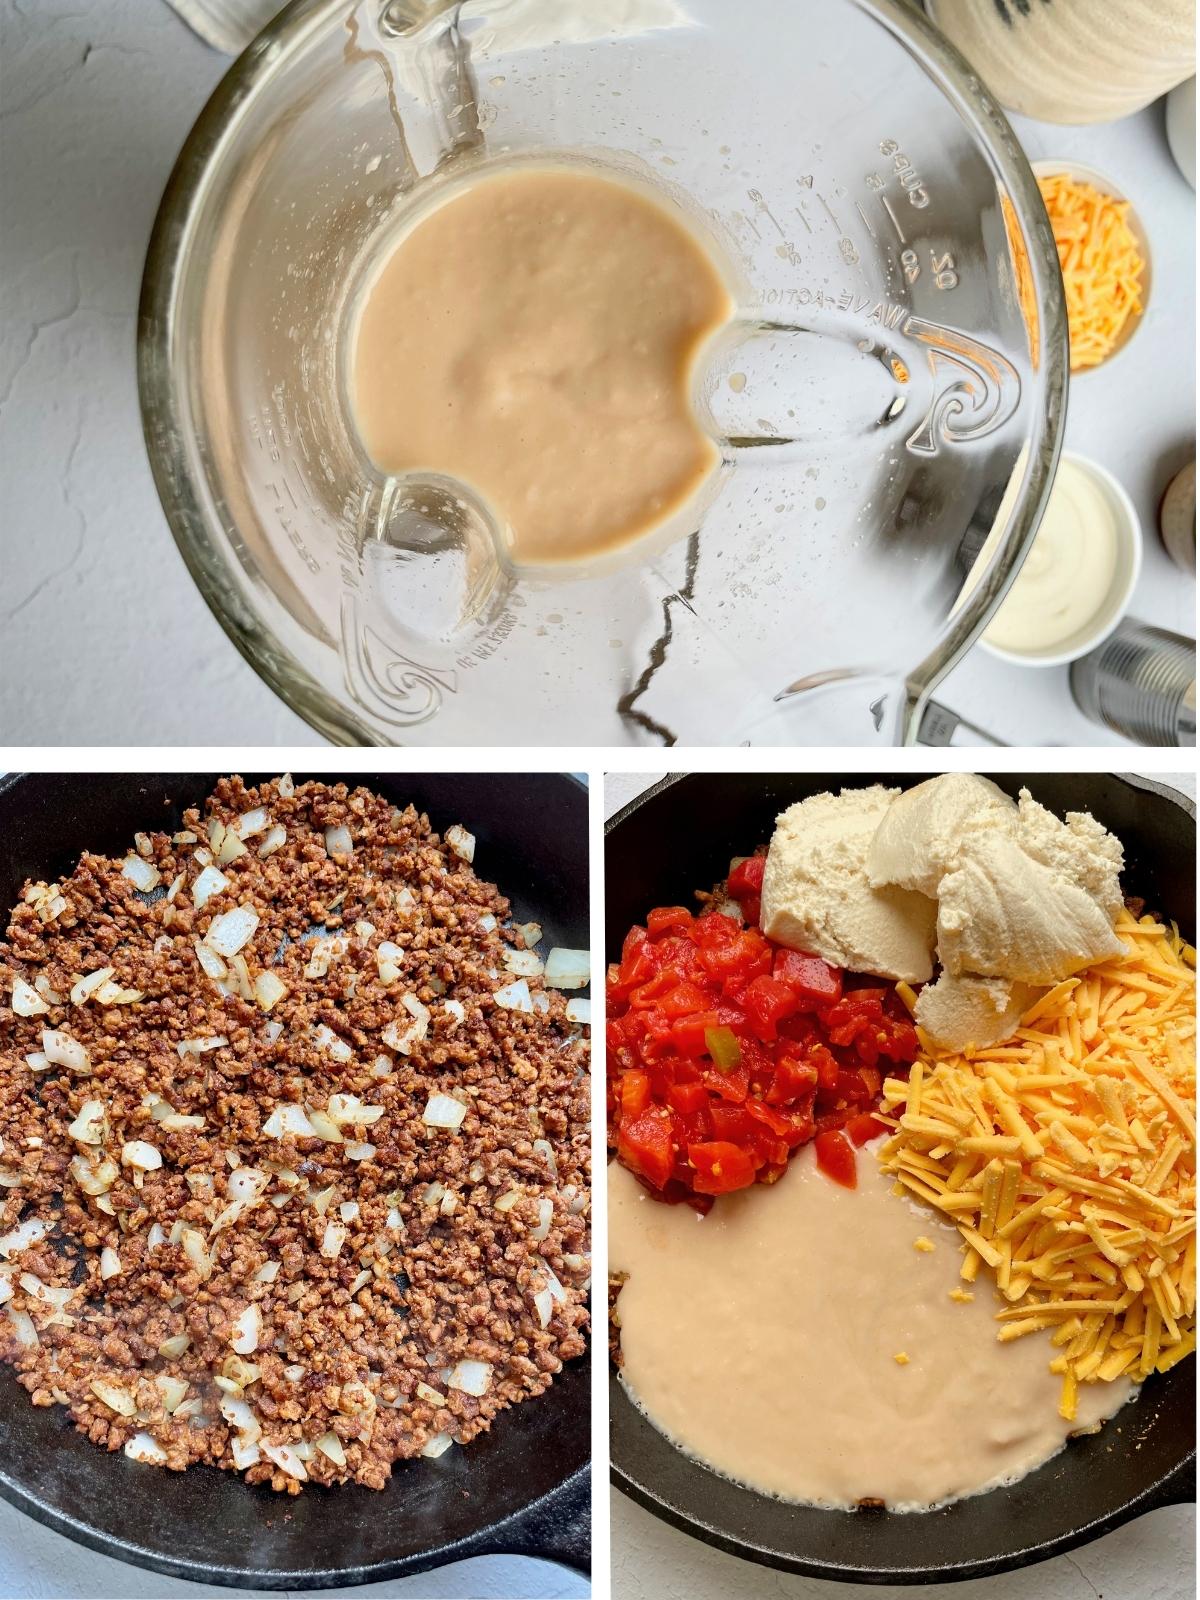 Process steps for making rotel cheese dip.